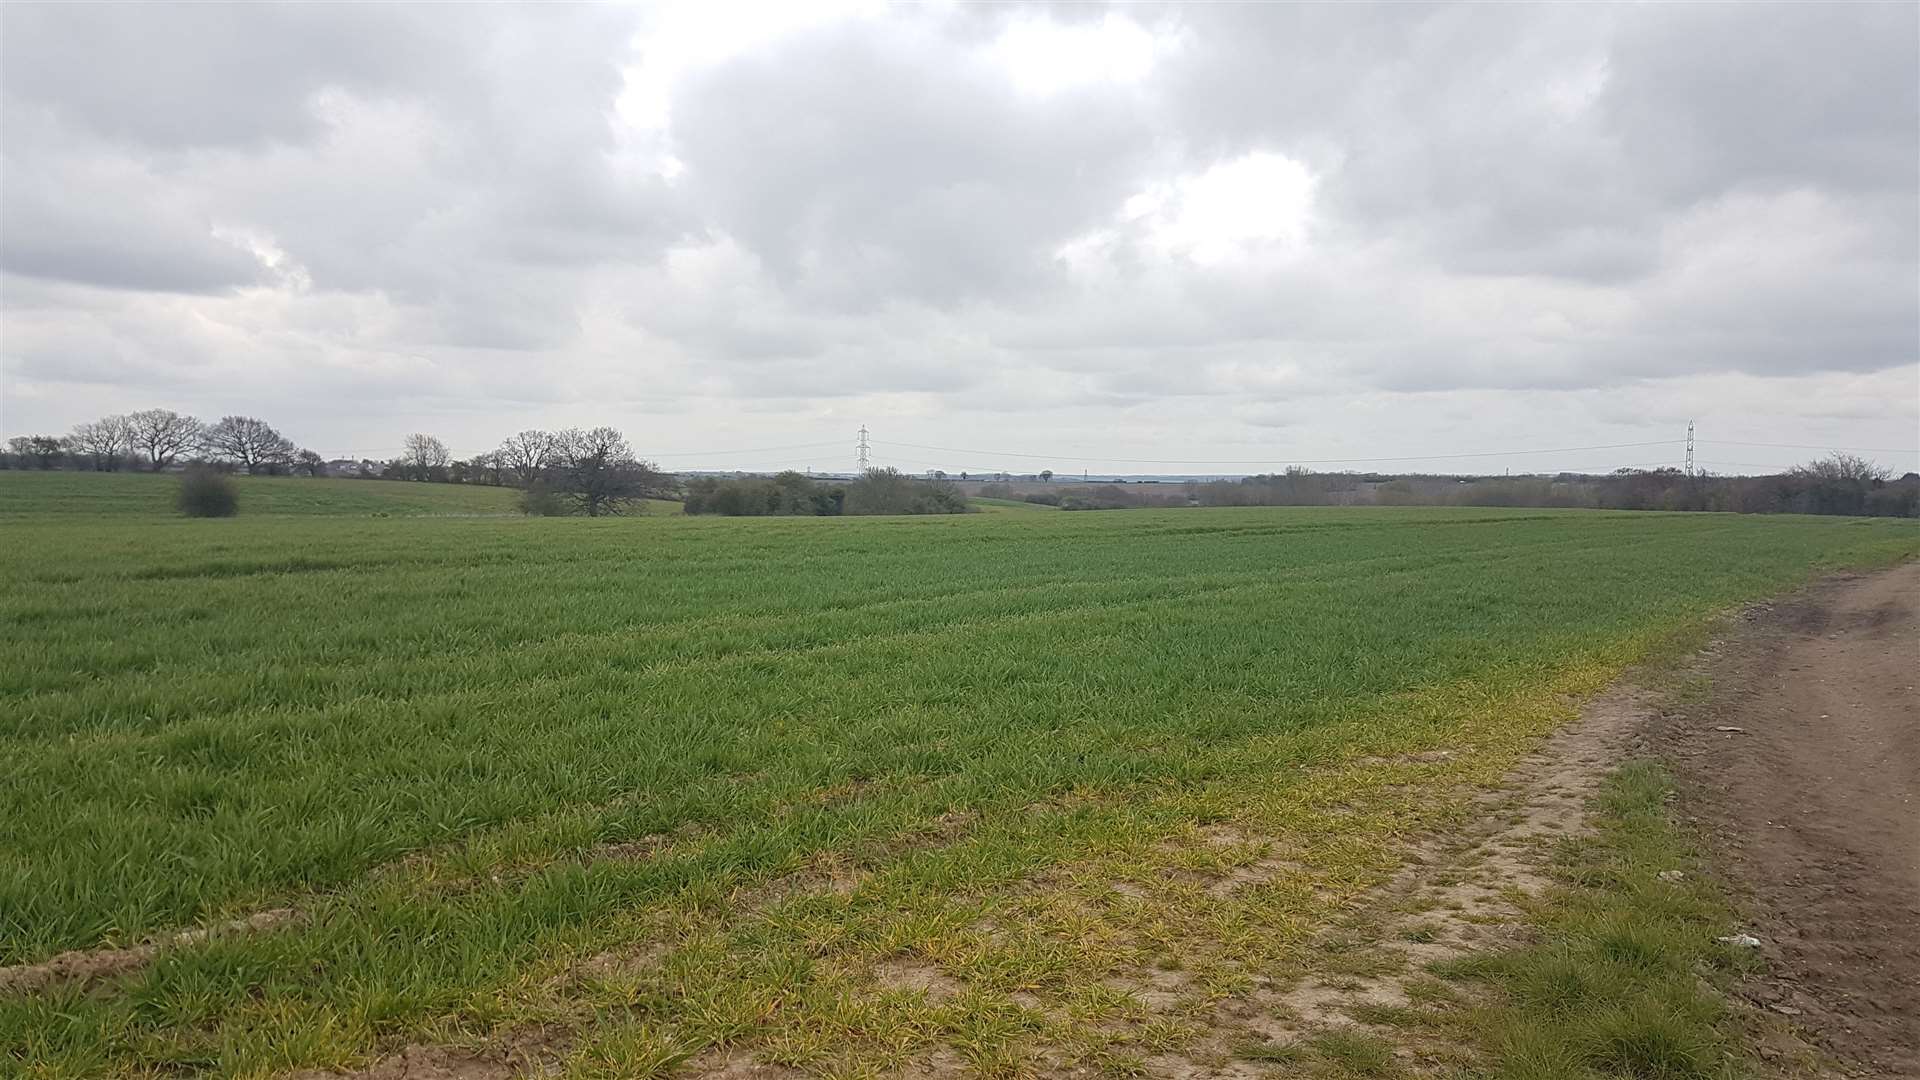 The site off Marley Lane is currently farmland